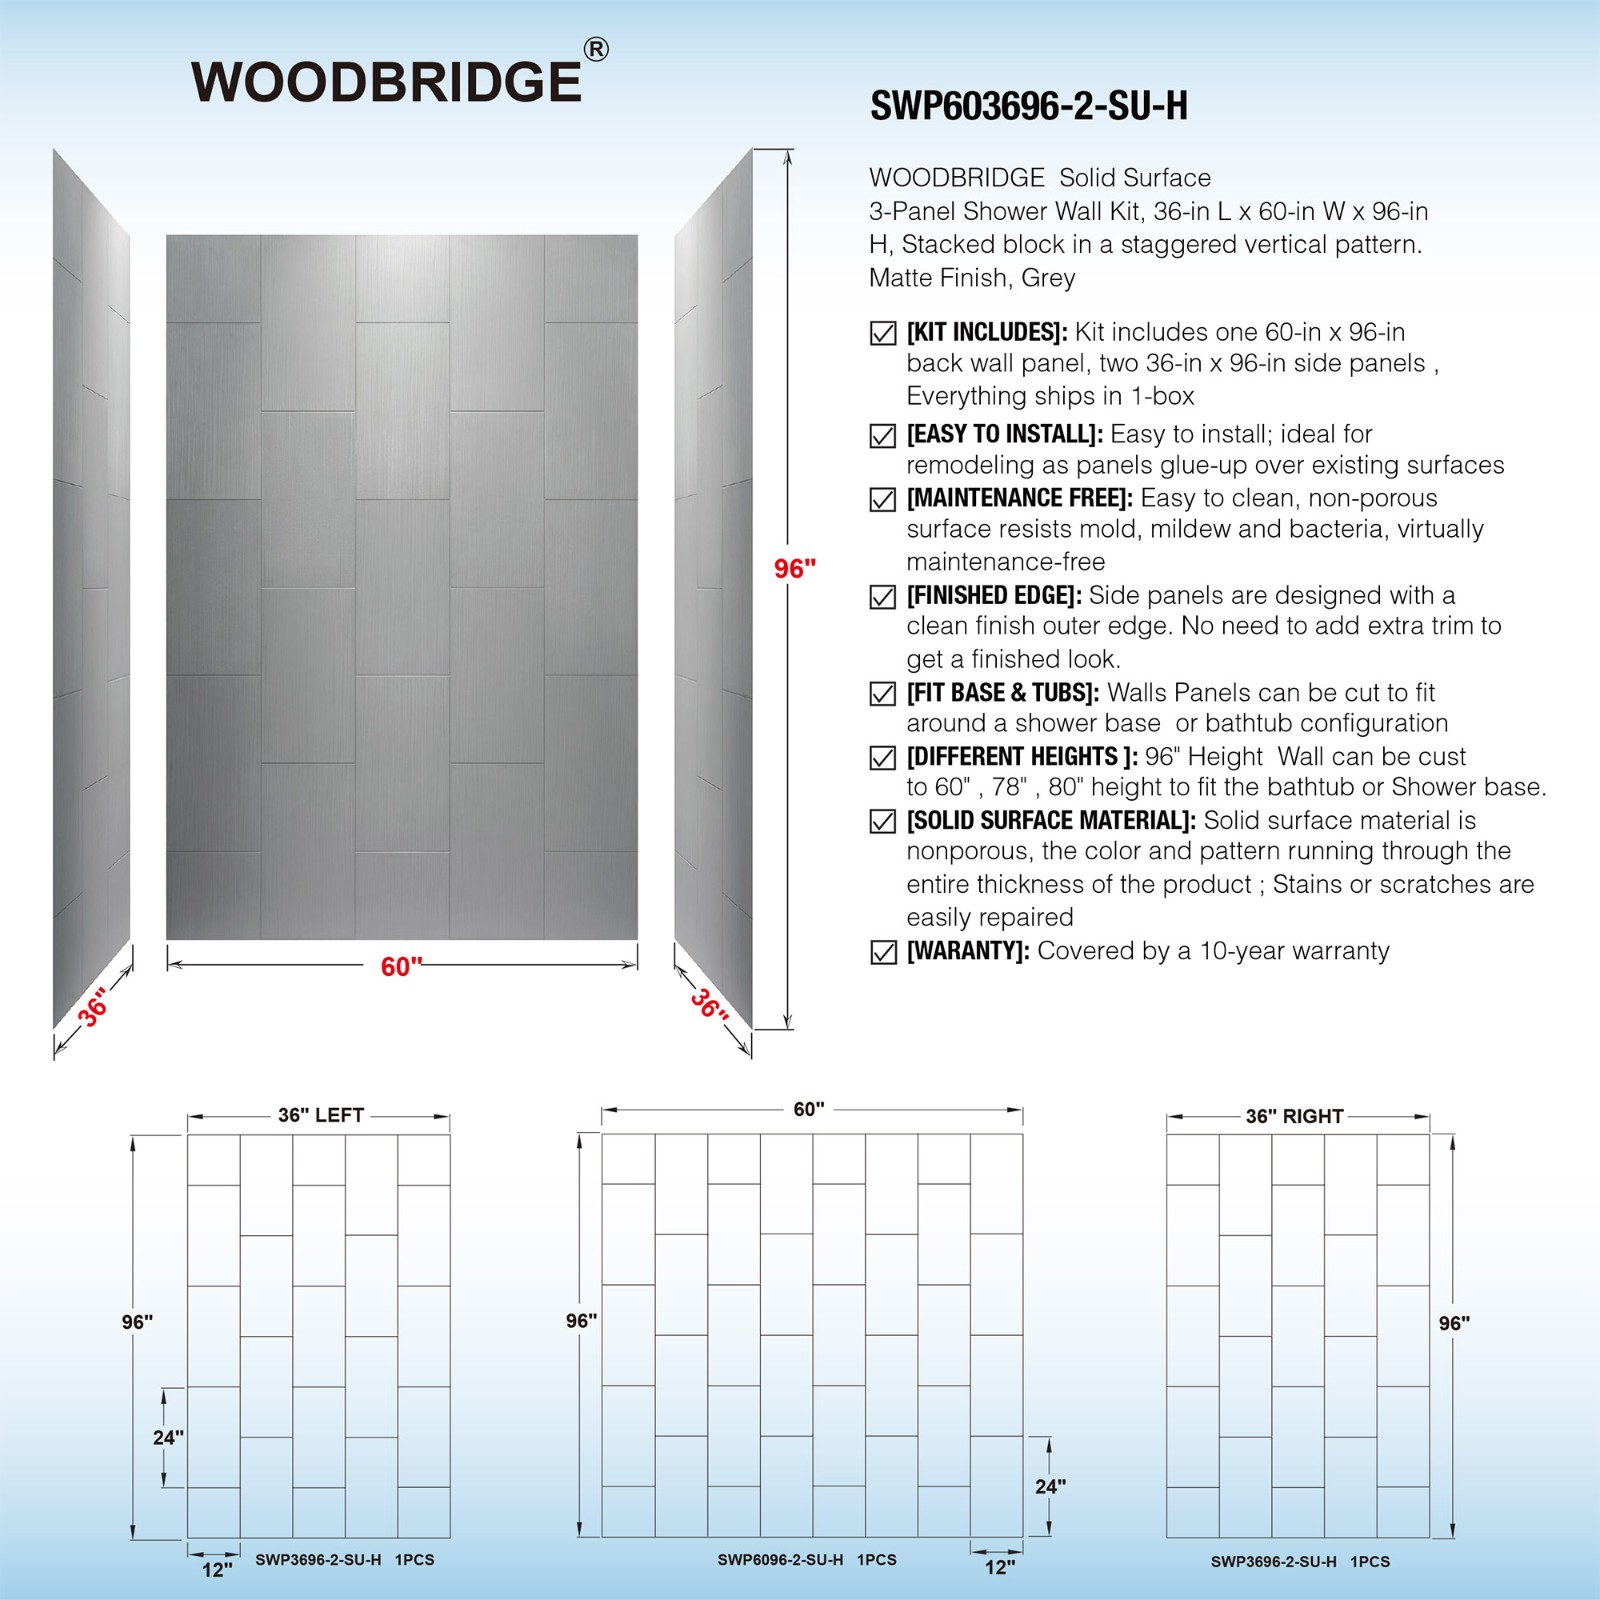  WOODBRIDGE Solid Surface 3-Panel Shower Wall Kit, 36-in L x 60-in W x 96-in H, Stacked Block in a Staggered Vertical Pattern. Matte Grey Finish_5276